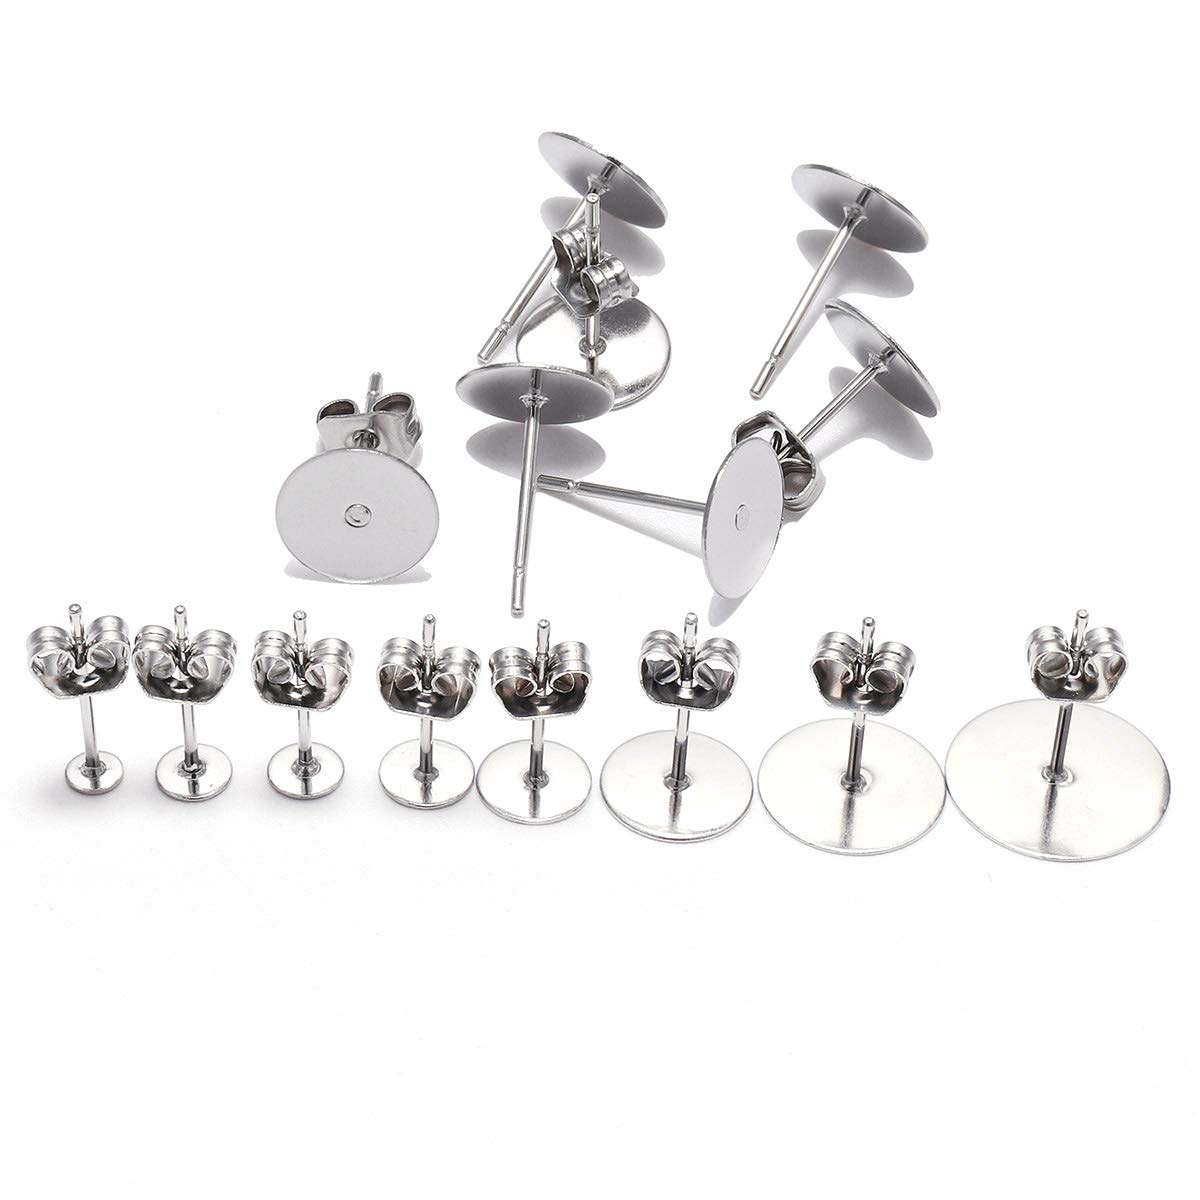 100pcs/lot Stainless Steel Blank Post Earring Studs Base Pins with Stainless Steel Butterfly Earring Backs Earrings Accessories for DIY Jewelry Making (Stainless Steel-100pcs, 3mm)